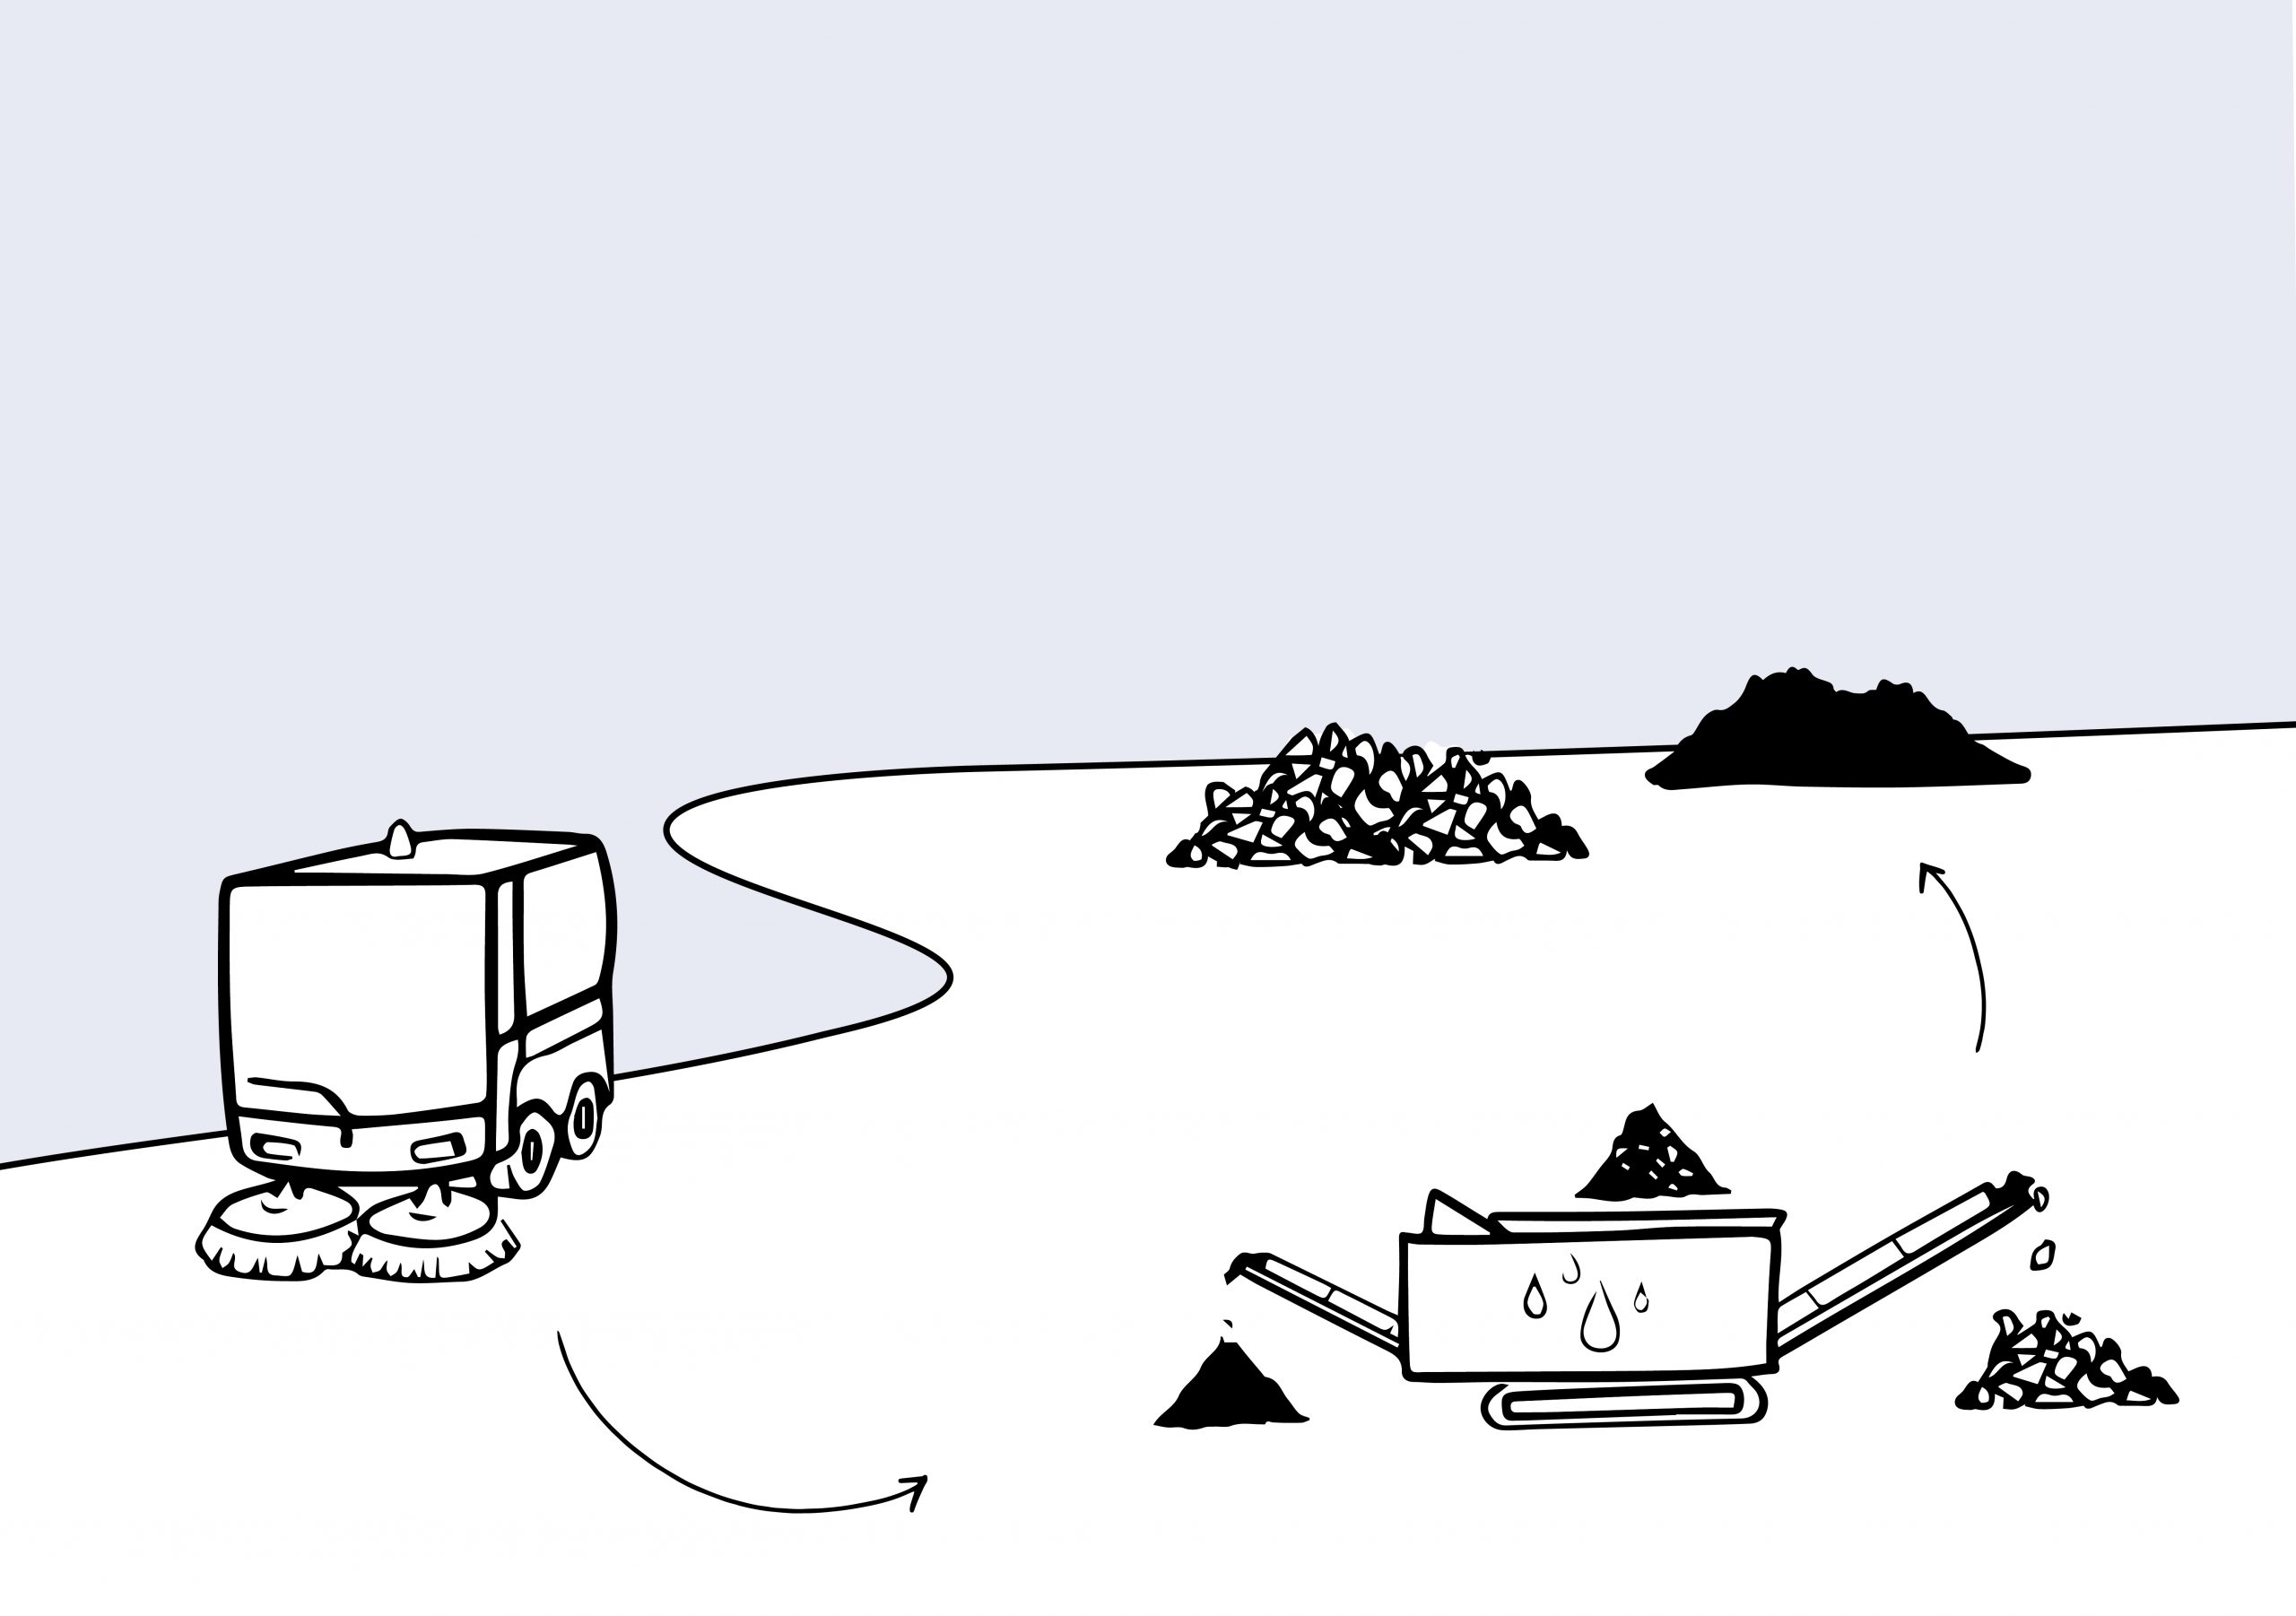 image shows an illustration of the street sweeping recycling process